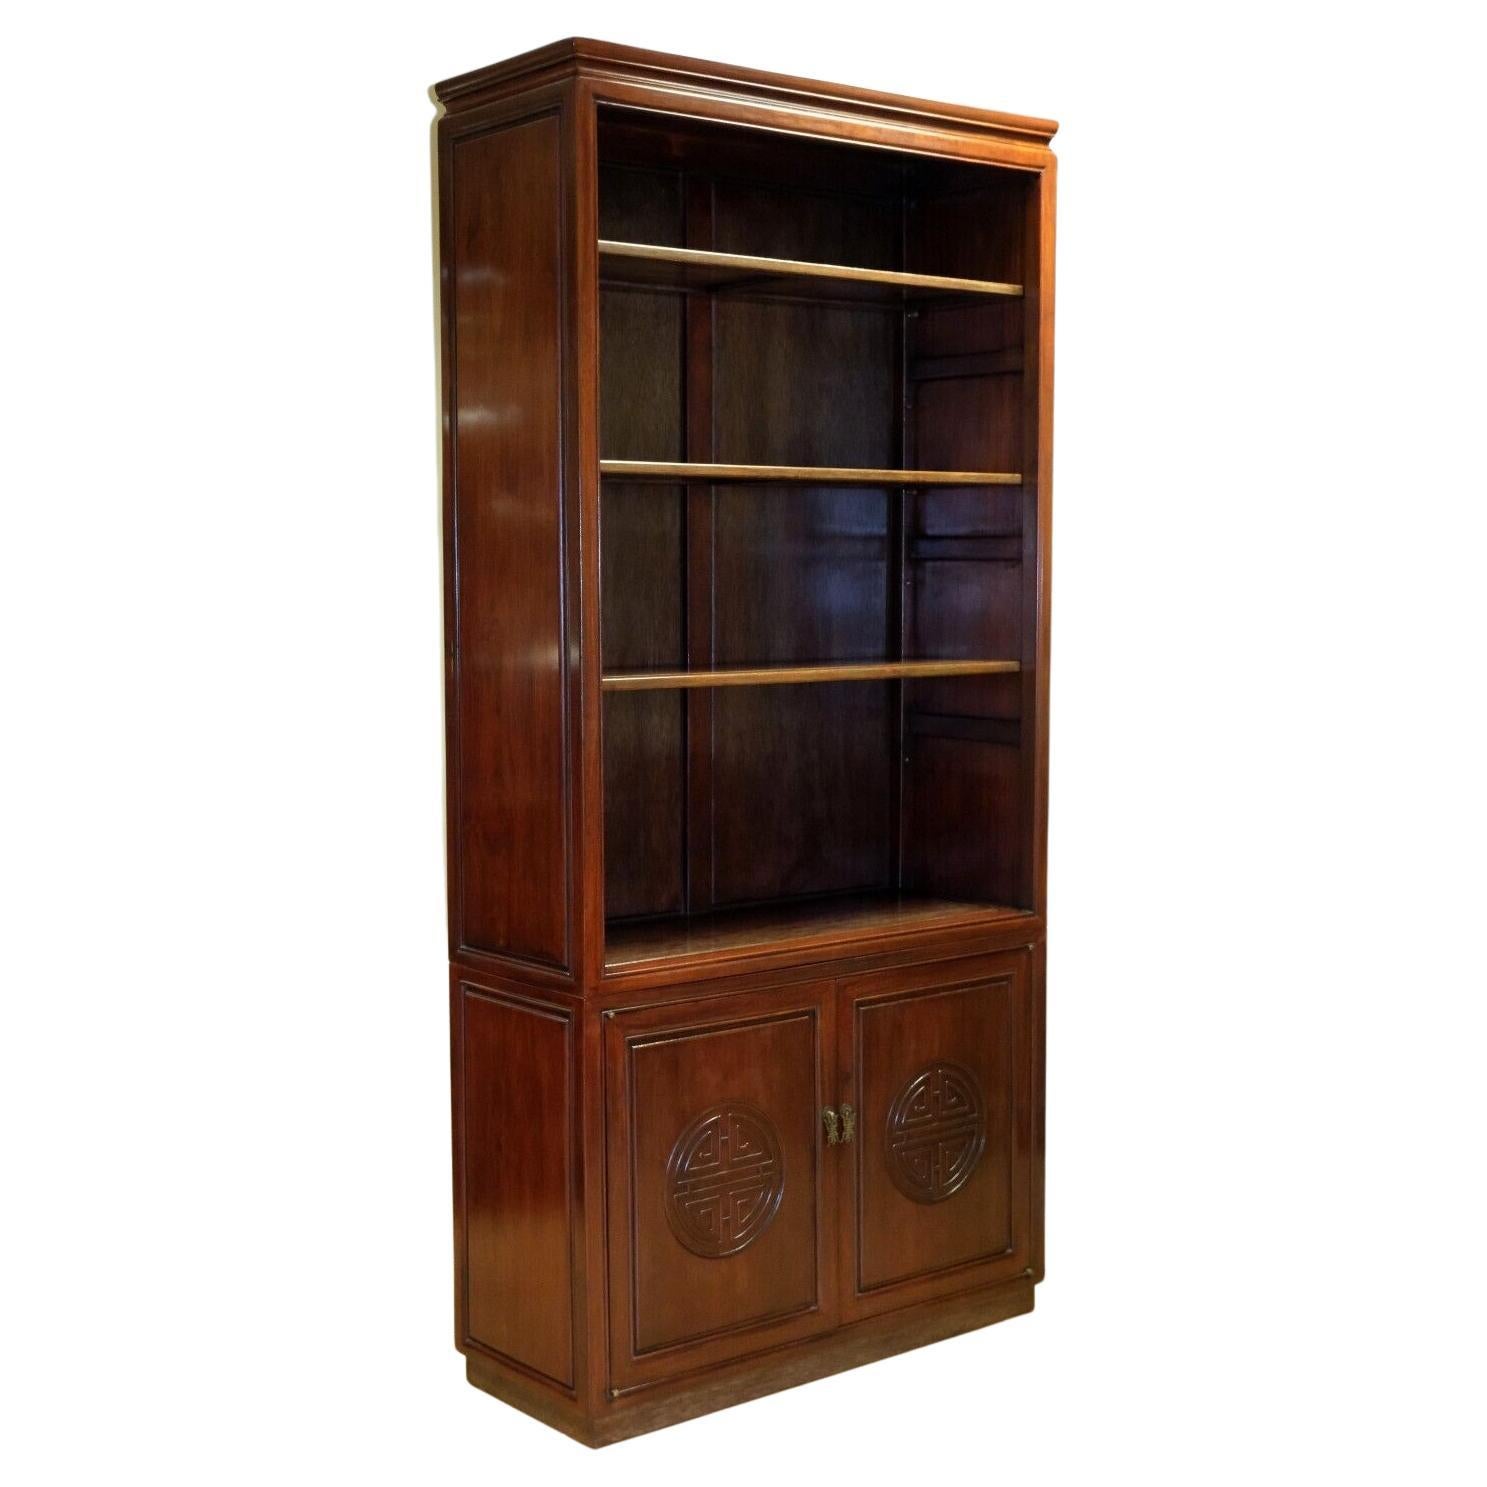 We are delighted to offer for sale this lovely Chinese Teak library brown bookcase/cabinet on a plinth base.

This versatile and practical bookcase cabinet is presented in a nice, rich, dark  colour. The top comes with three adjustable shelves,